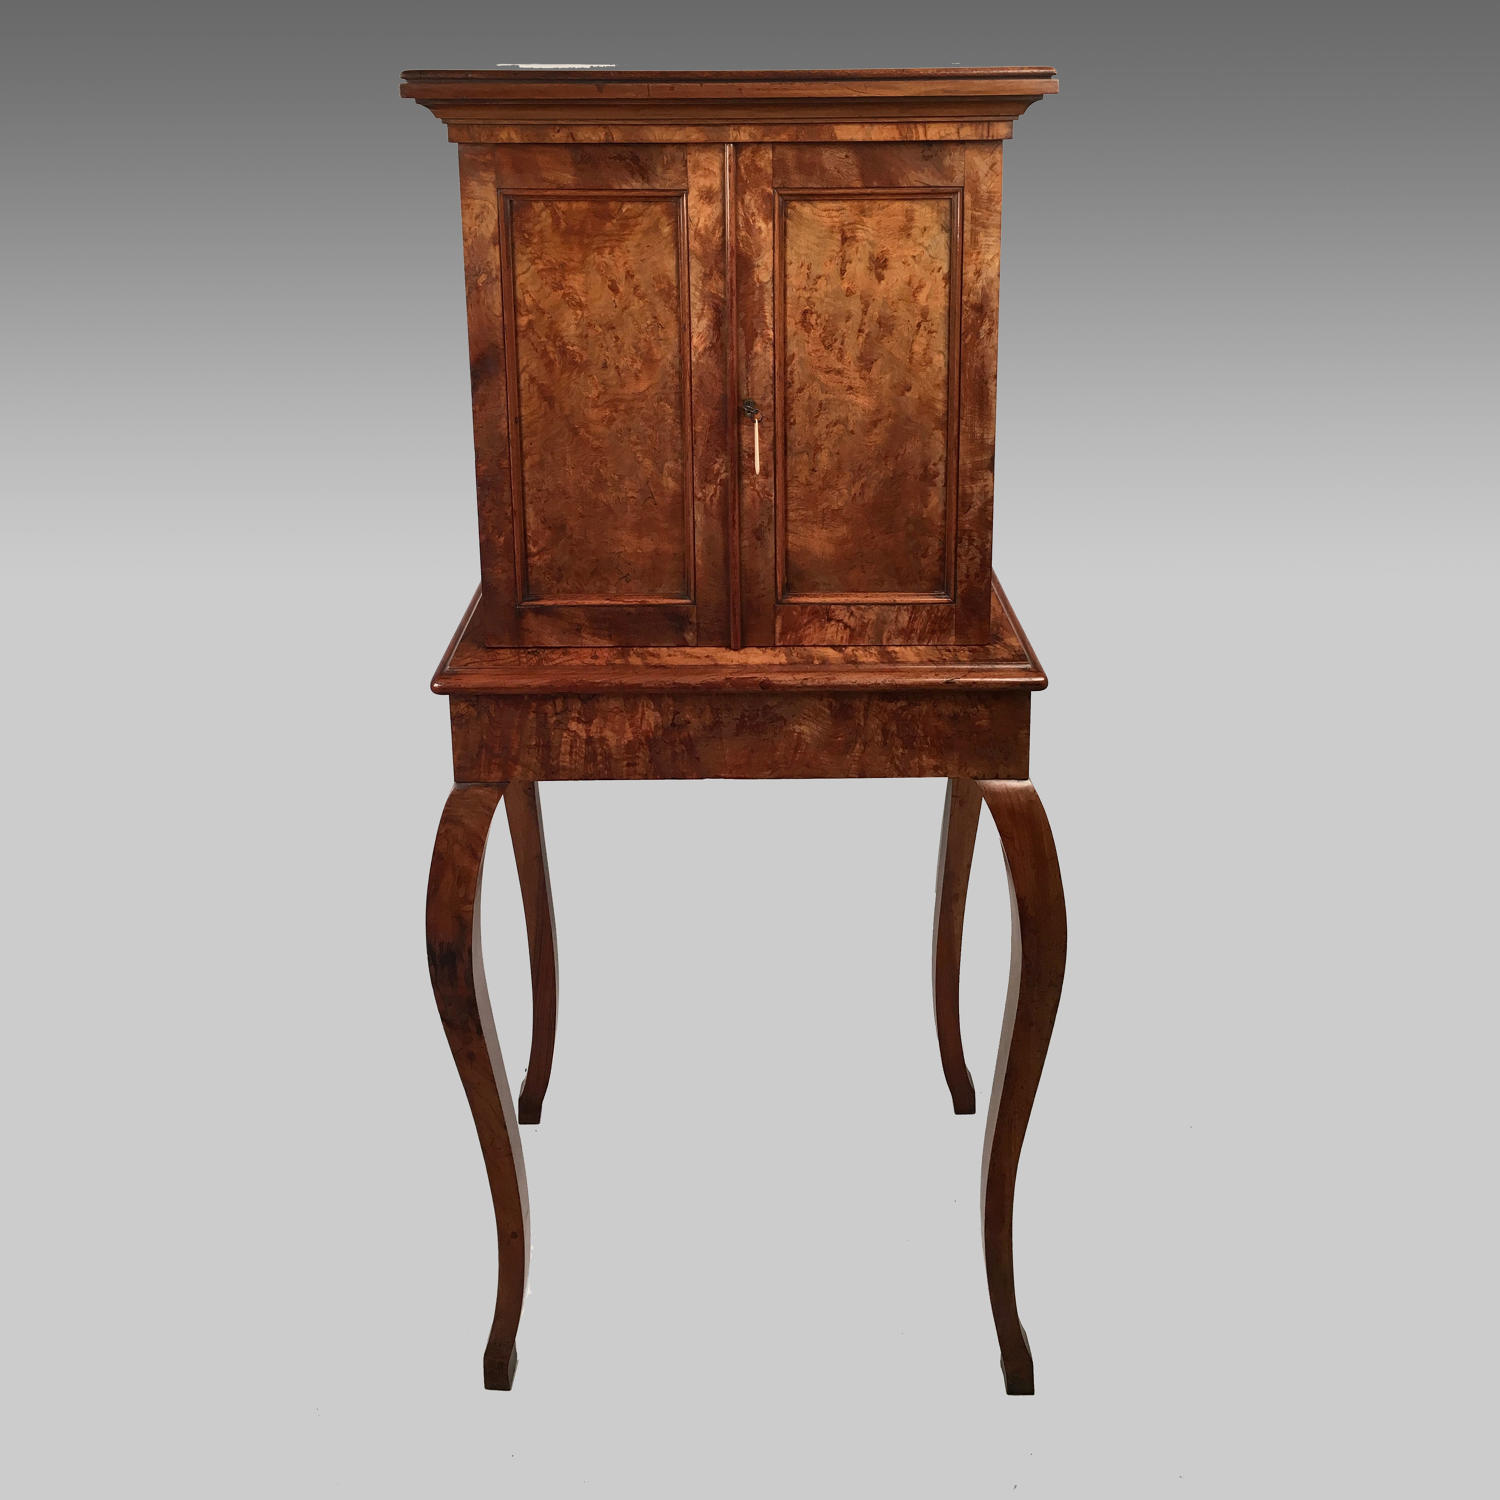 Late 19th century walnut, collector's cabinet on stand